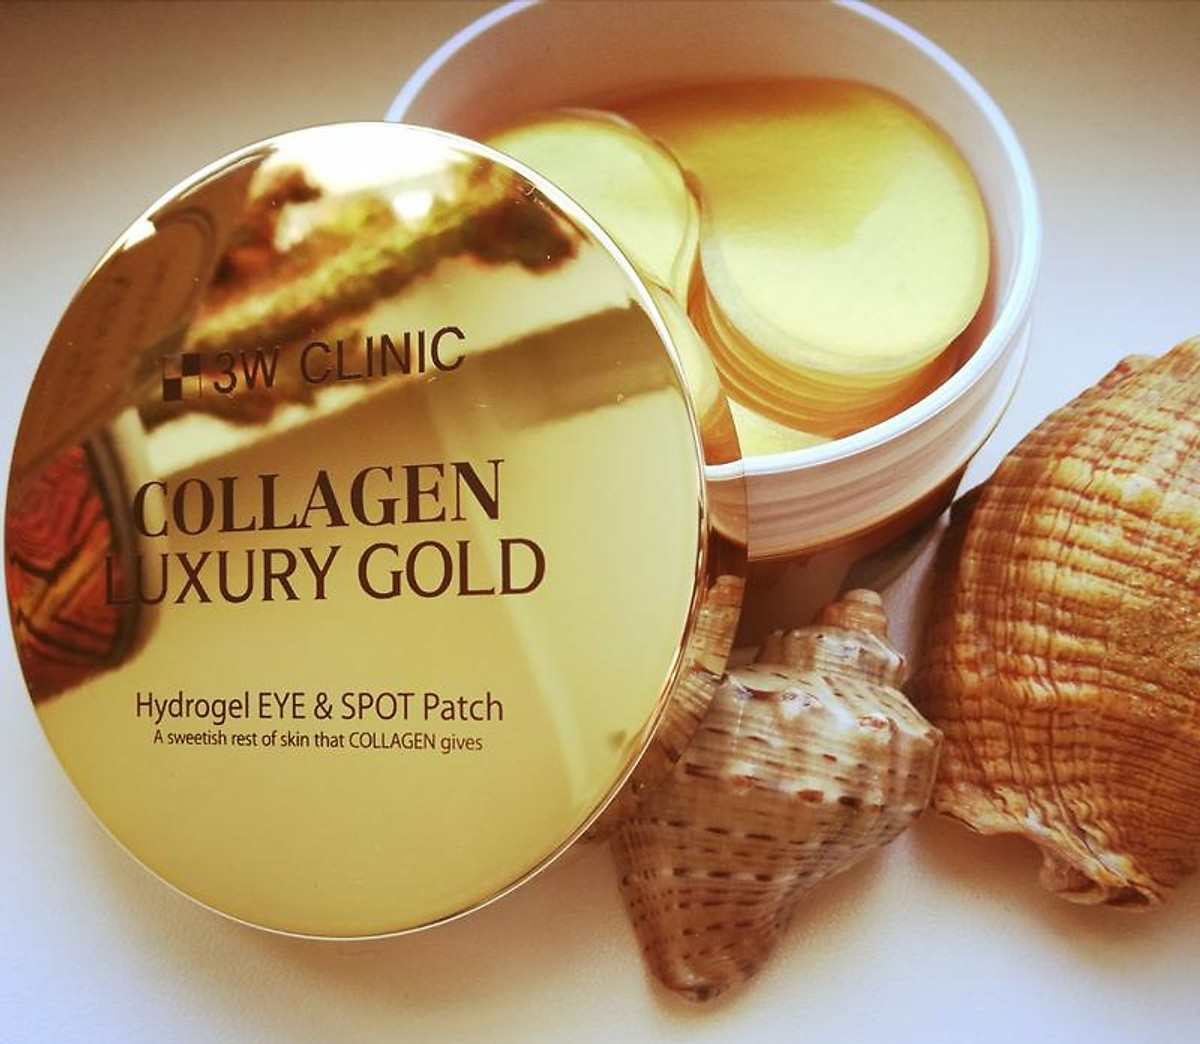 Mặt nạ mắt 3W Clinic Collagen Luxury Gold